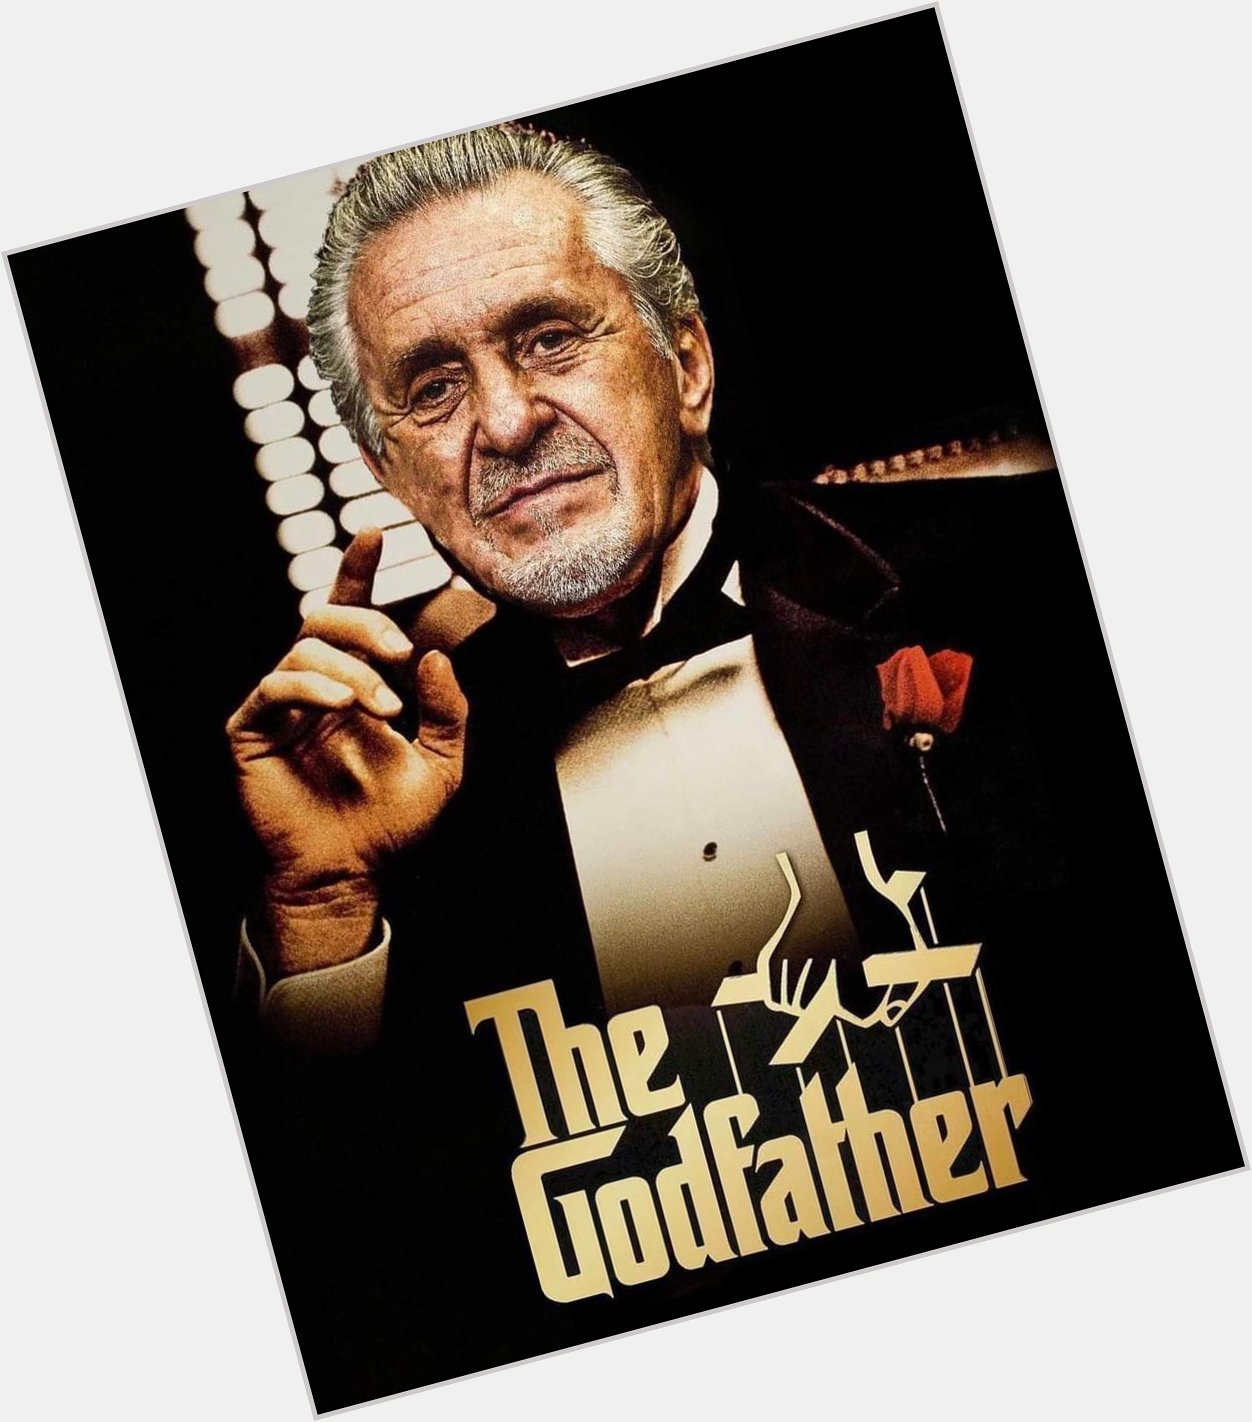 Happy Birthday to The Godfather, Pat Riley. 

(Come forward for due credit on this edit whoever made it) 